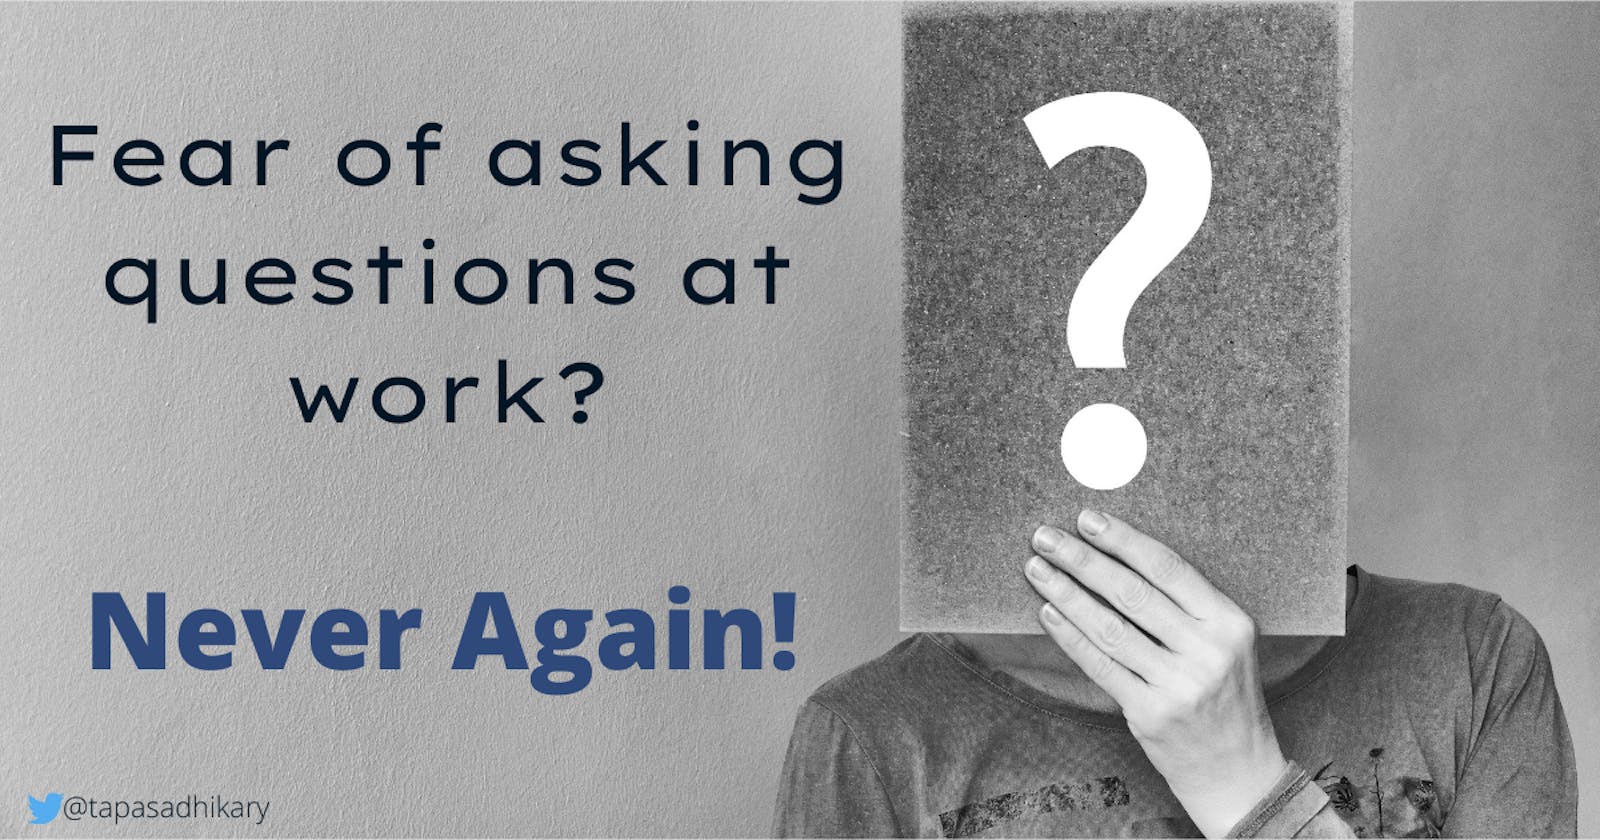 Fear of asking questions at work? Never again